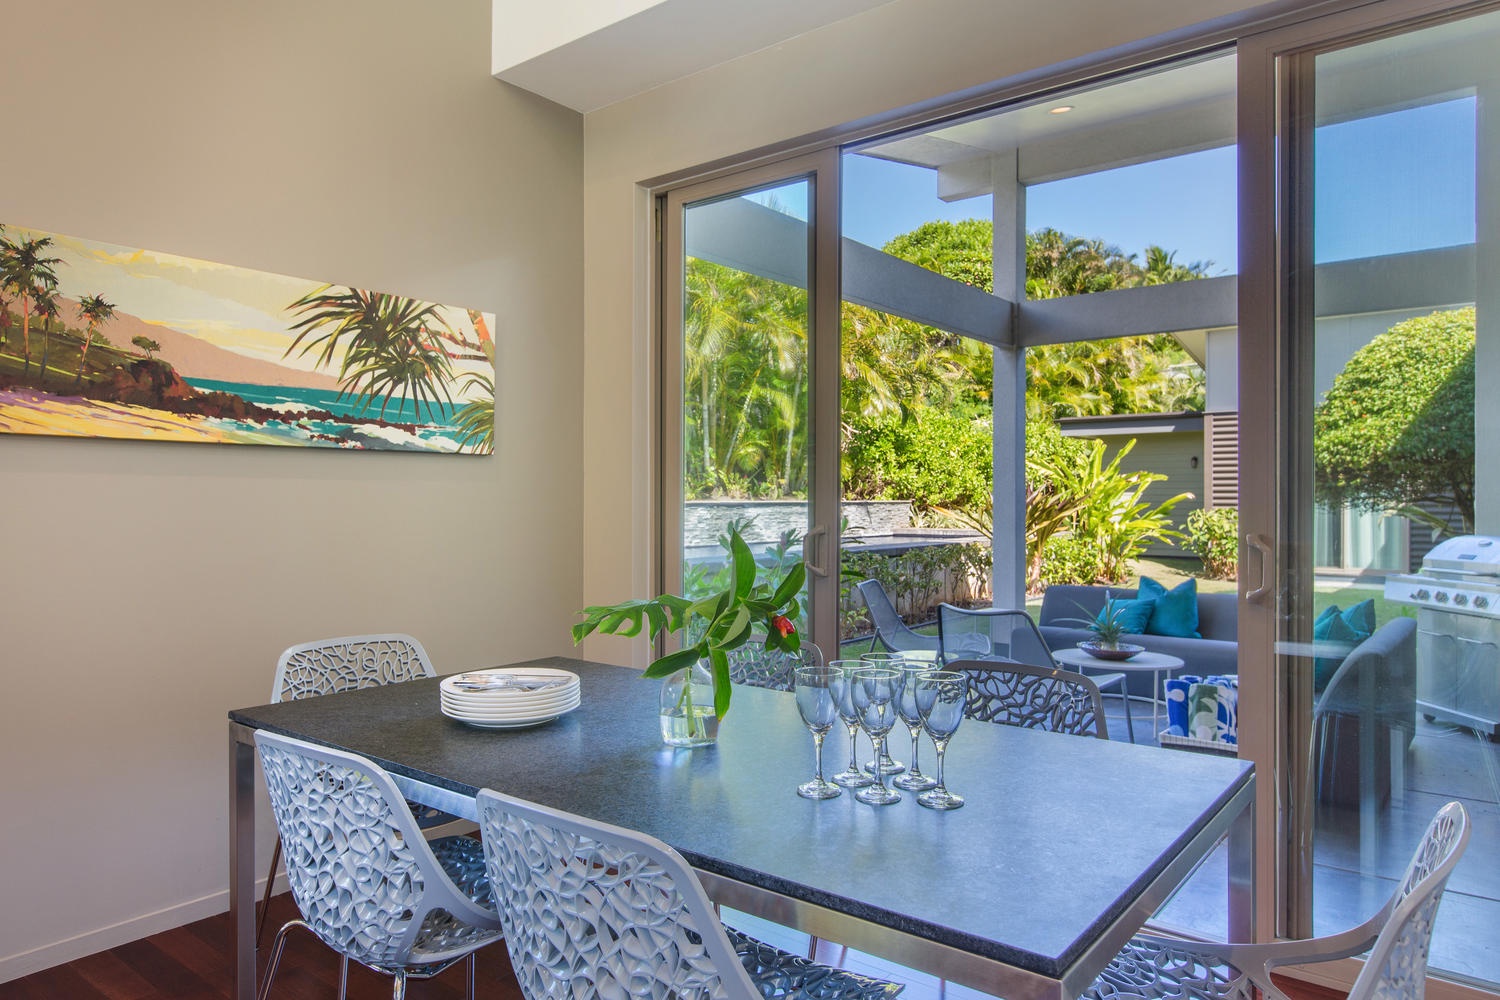 Honolulu Vacation Rentals, Hale Laulea - Dining room off living room and kitchen